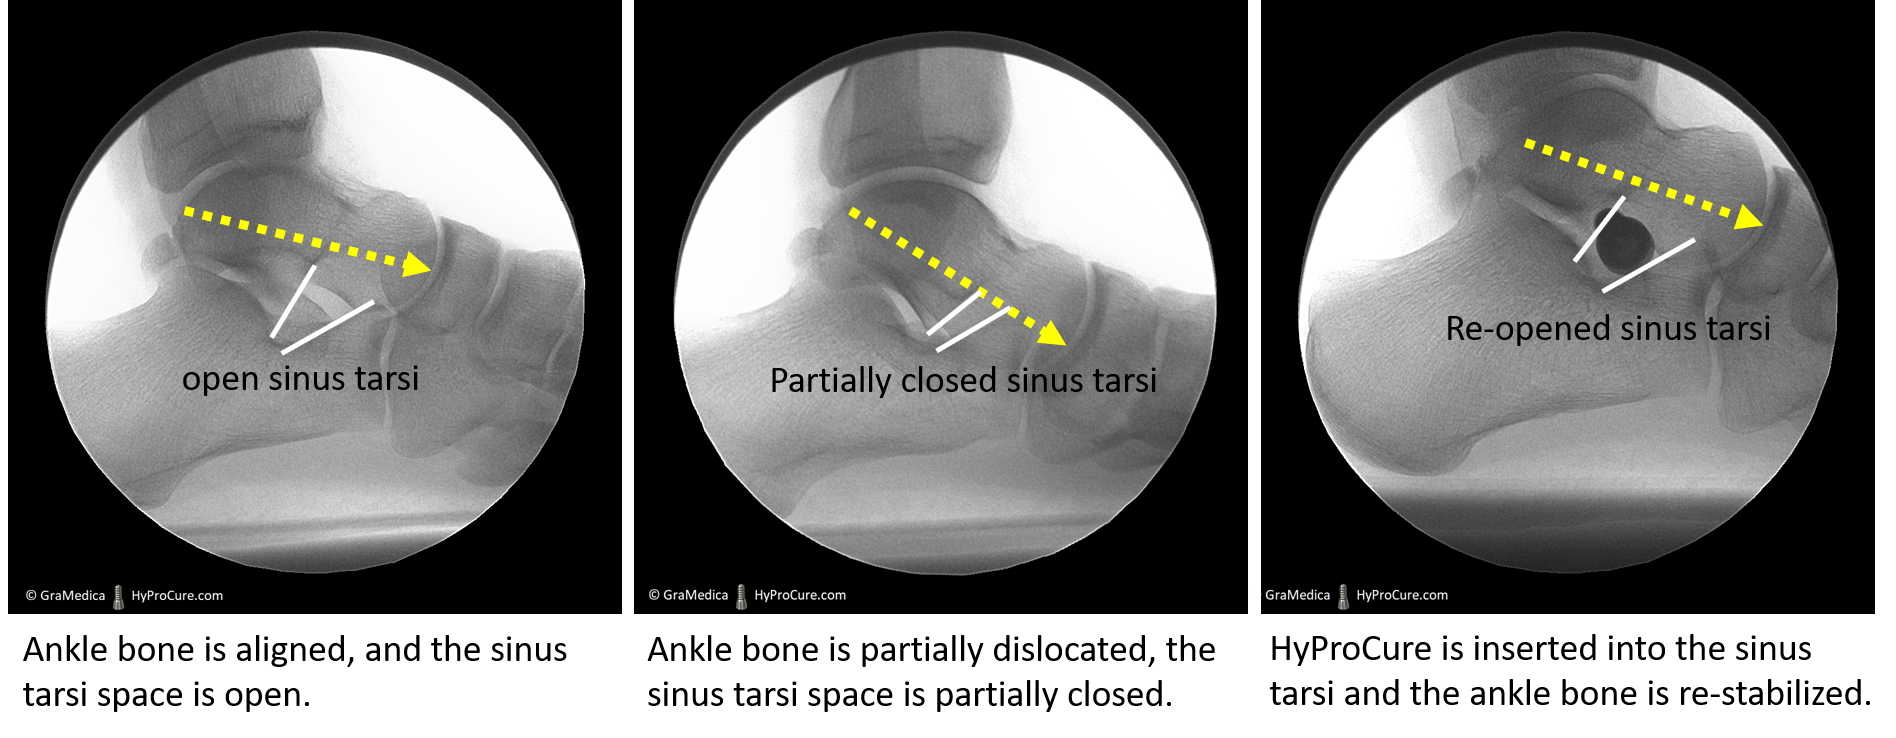 x-ray of the HyProCure implant placed in sinus tarsi space